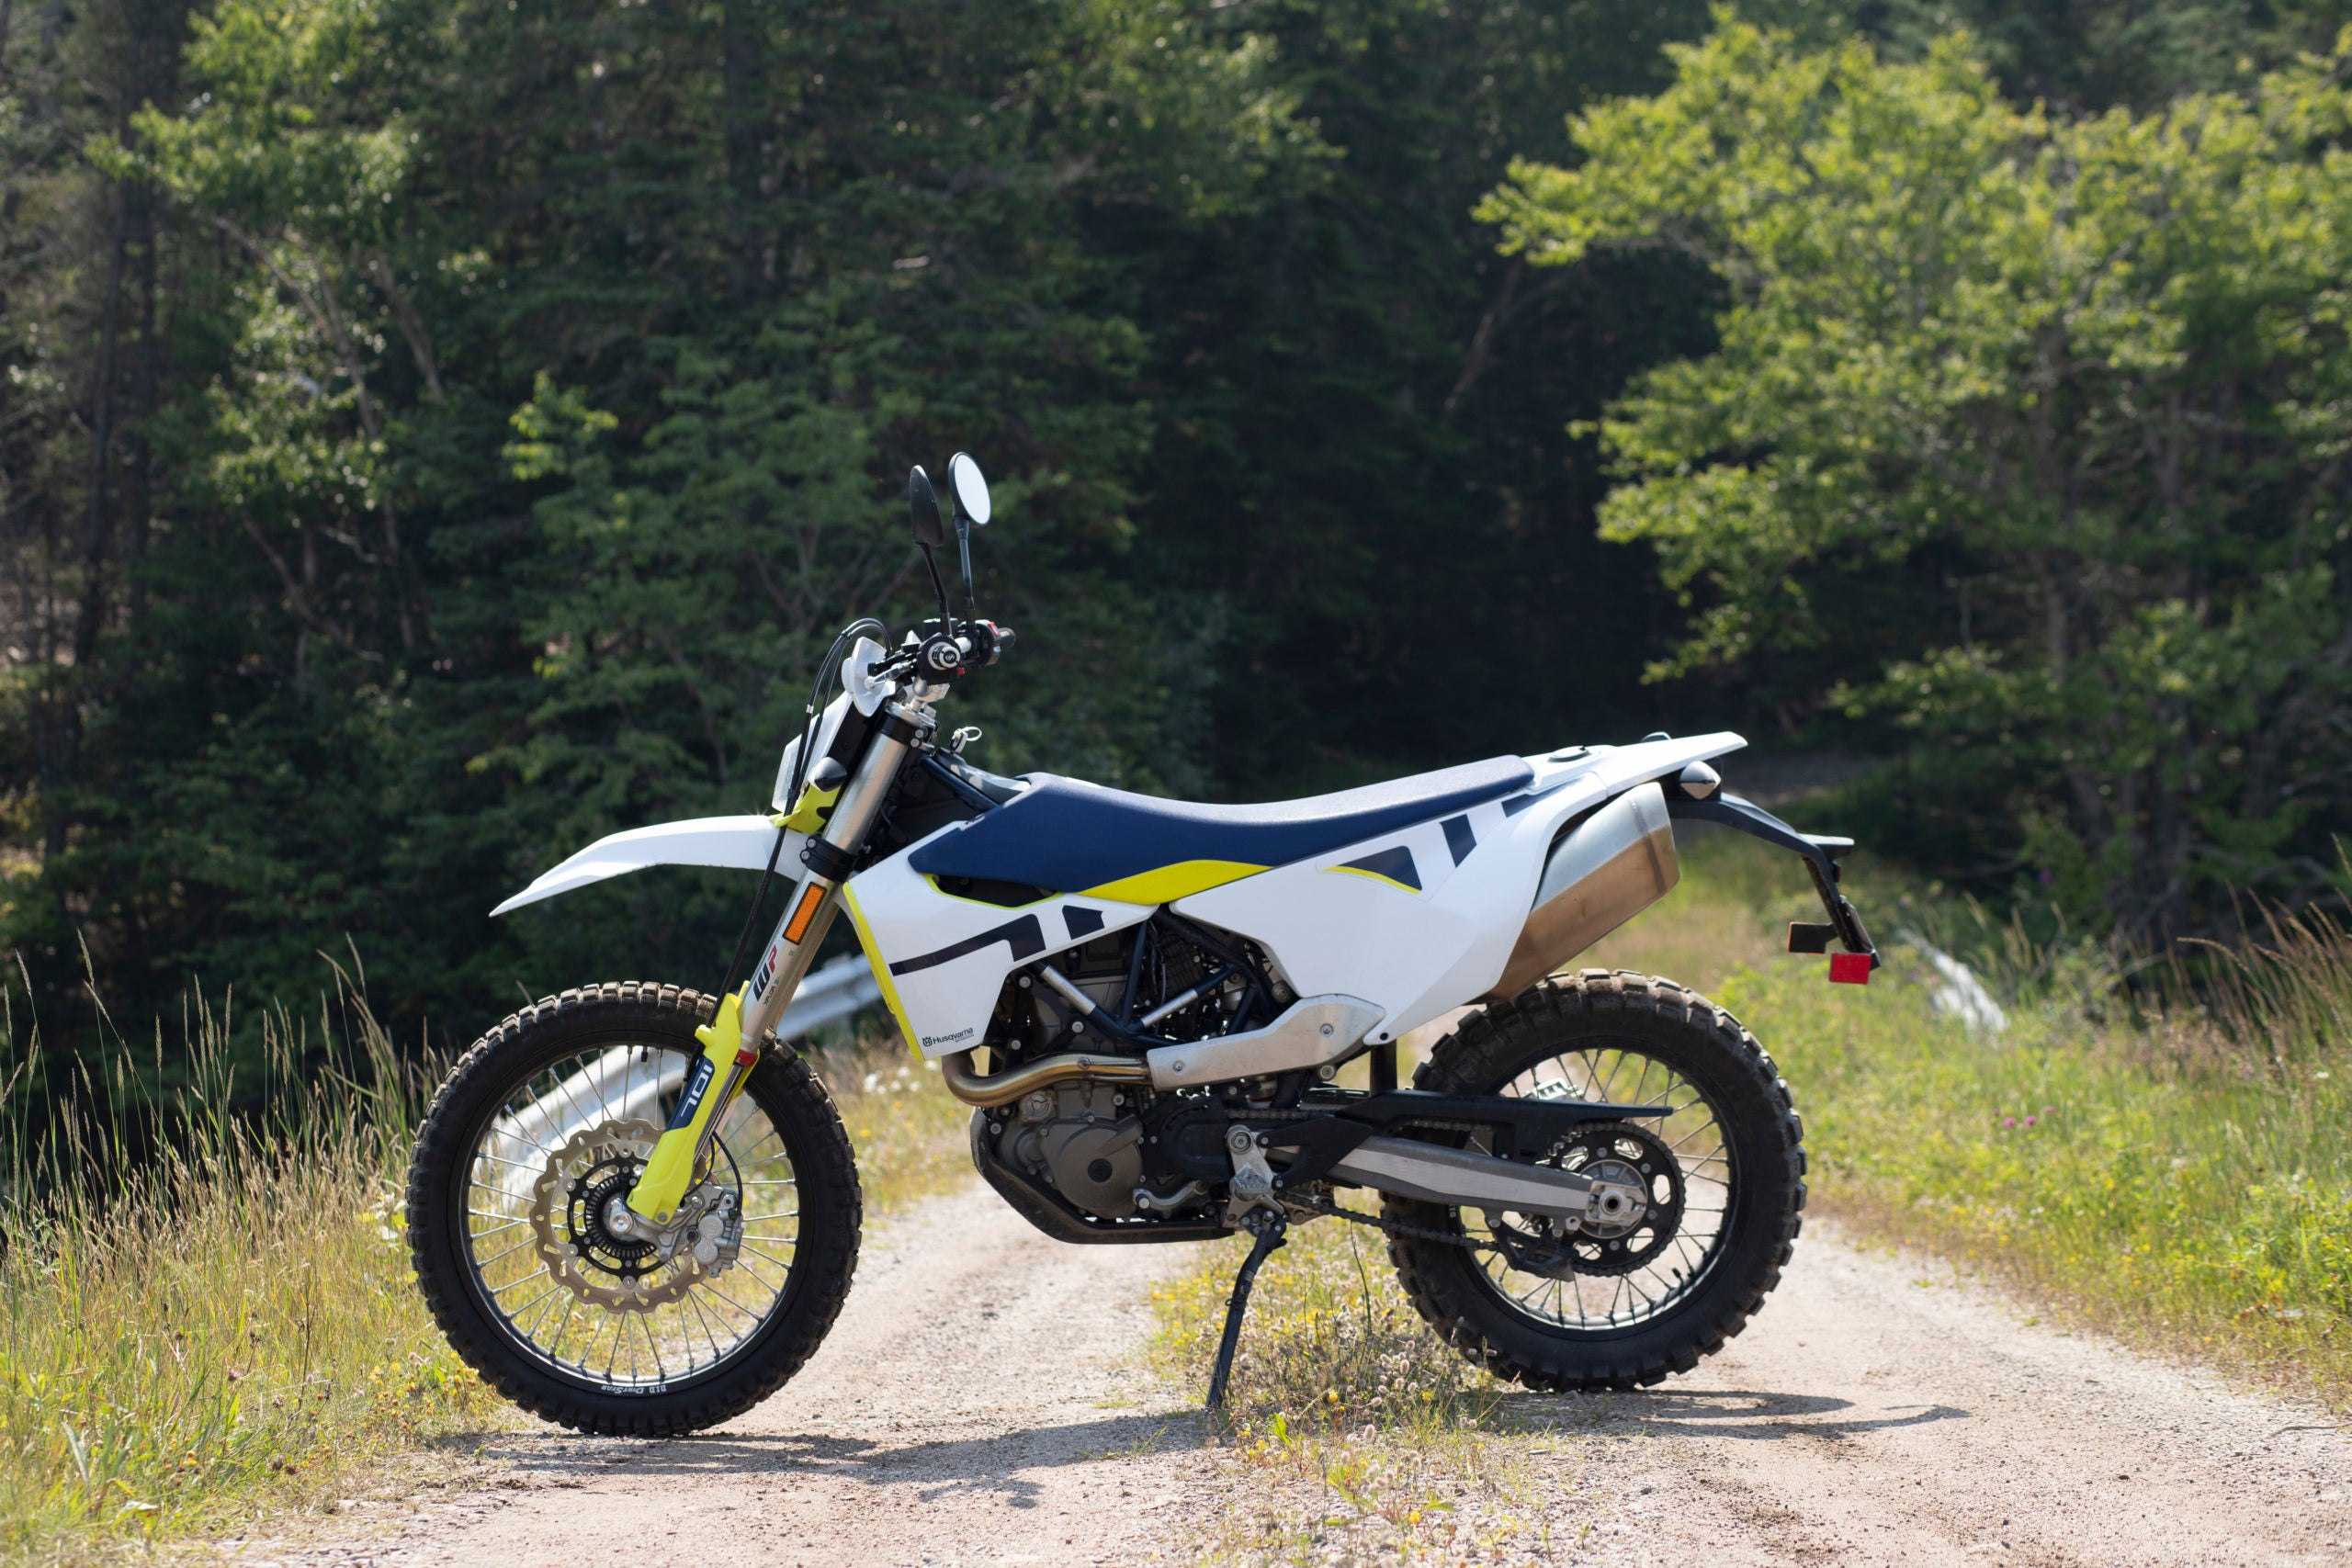 Review / Husqvarna 701 Enduro: For trails, or travel? - Adventure